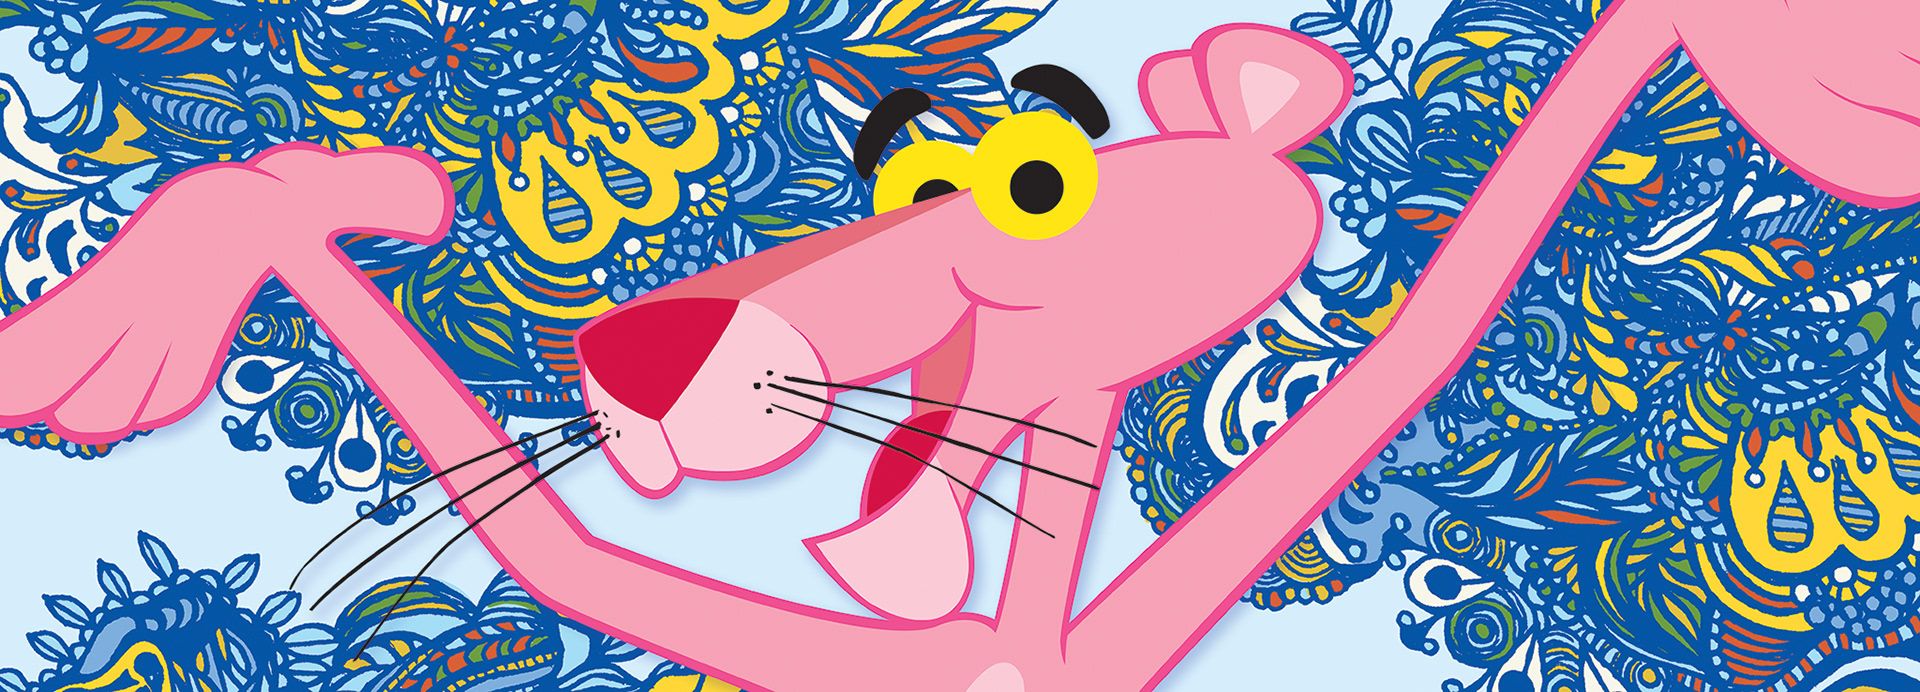 A cartoon pink cat with blue and yellow background - Pink Panther